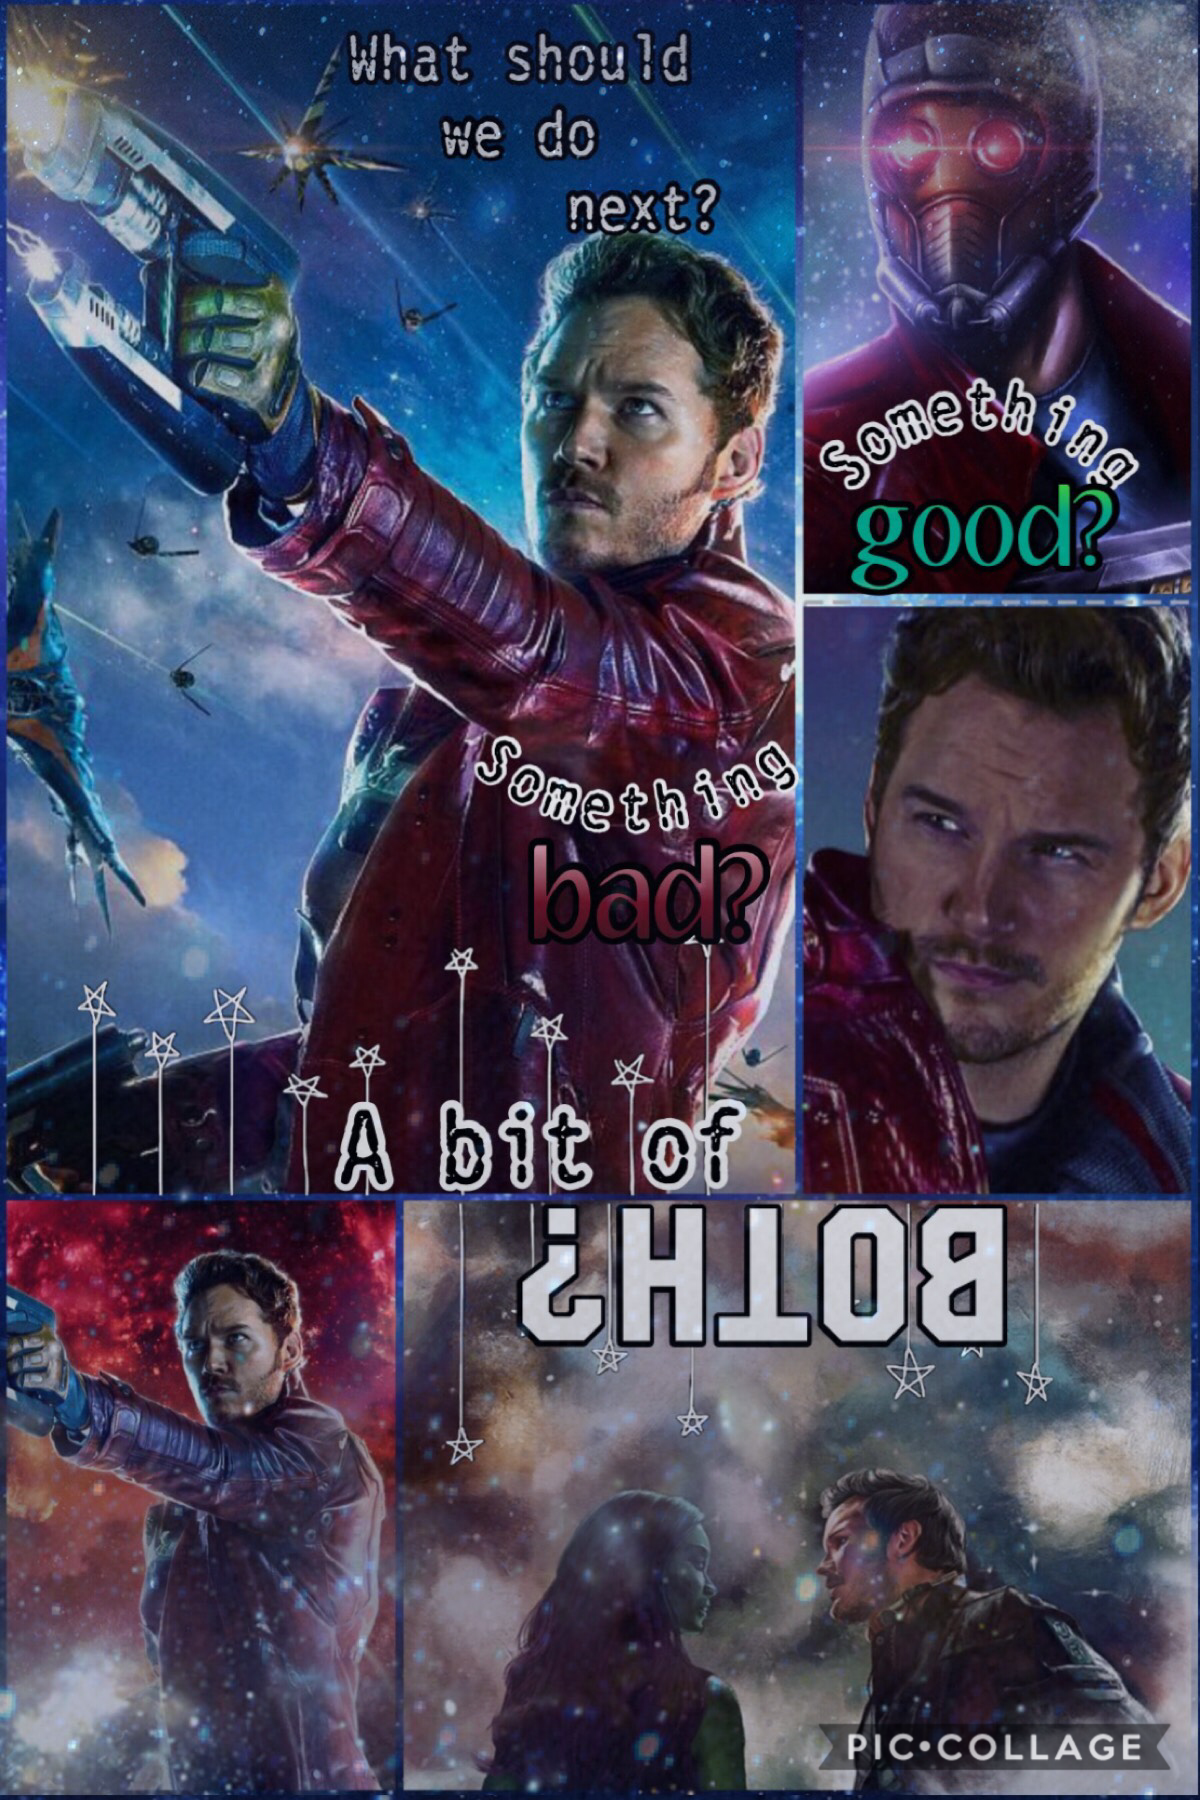 ⭐️Tap!⭐️

Presenting Peter Quill...
you may also know him as Star Lord!

You may also see him listening to 60s and 70s music while playing the air guitar. 
🎶🎶🎶
